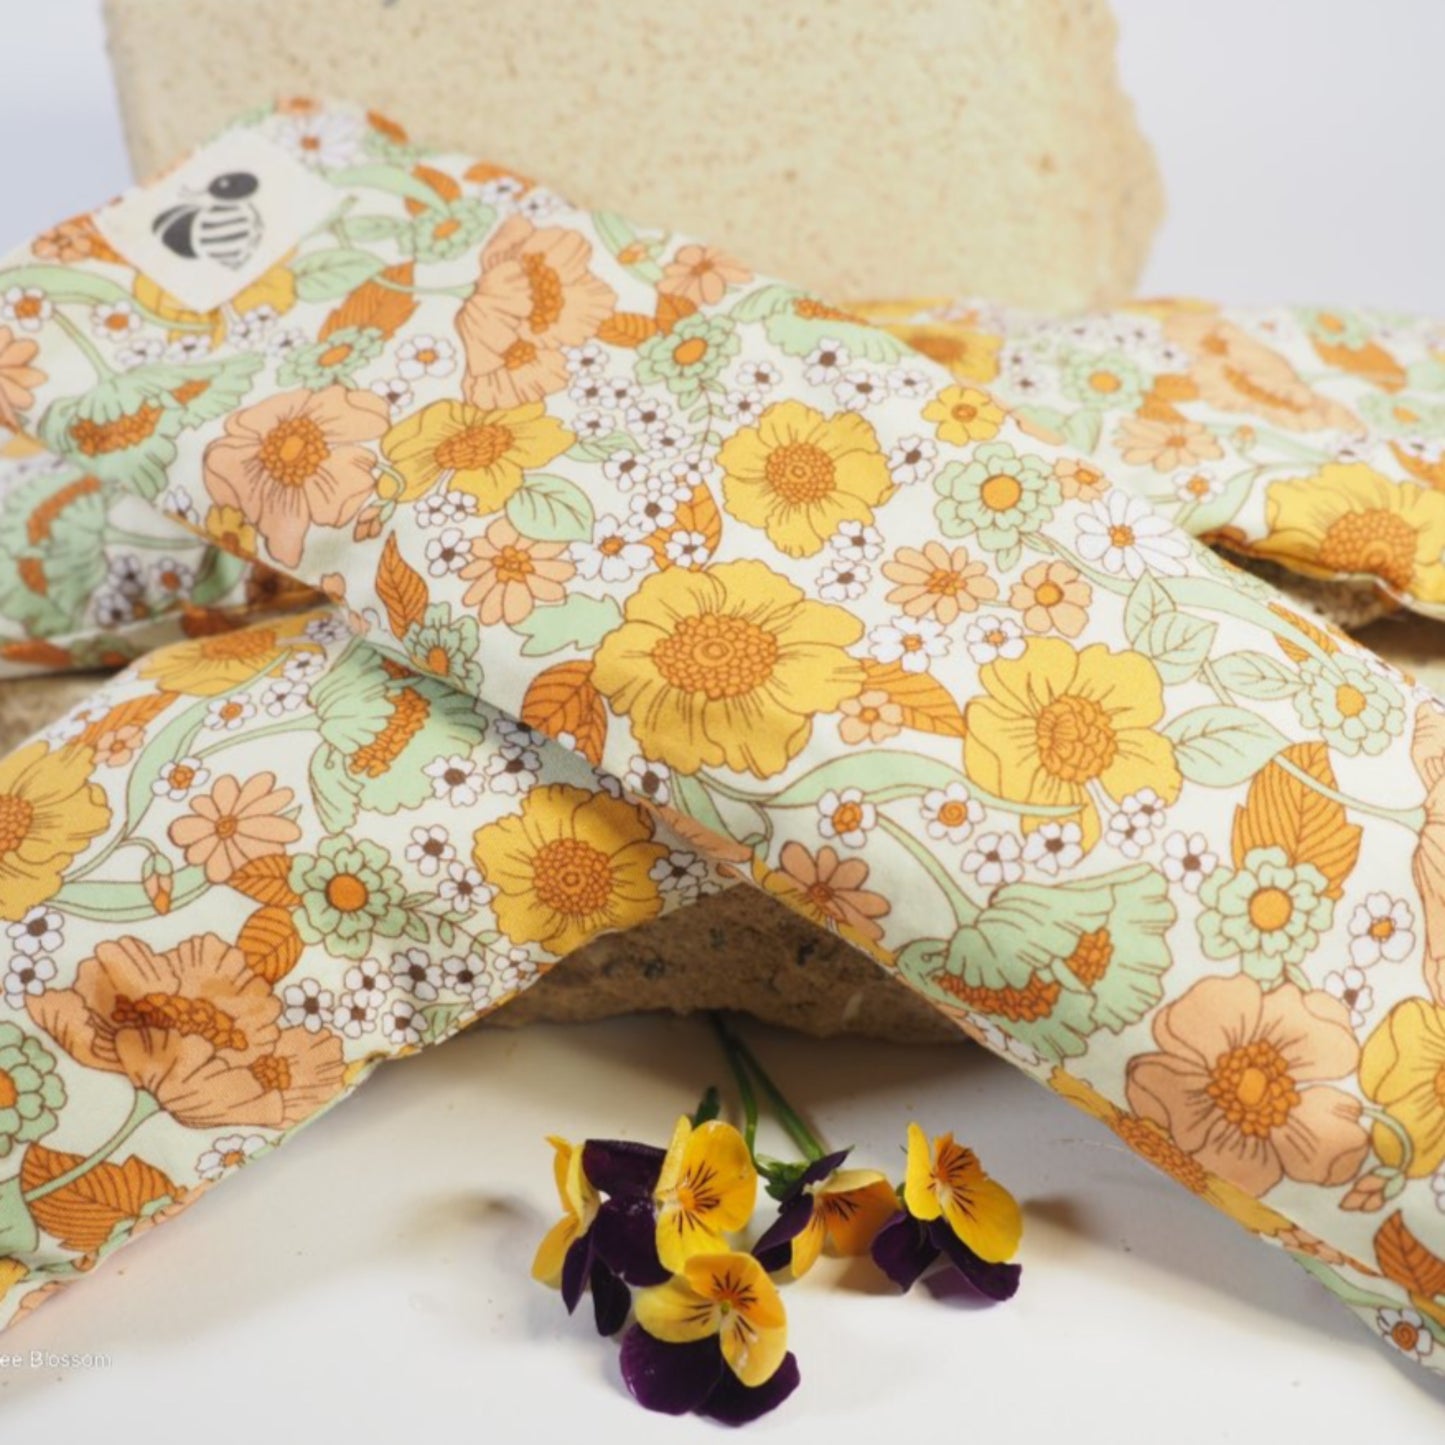 Lavender eye pillows in organic cotton poplin fabric with floral blossoms.